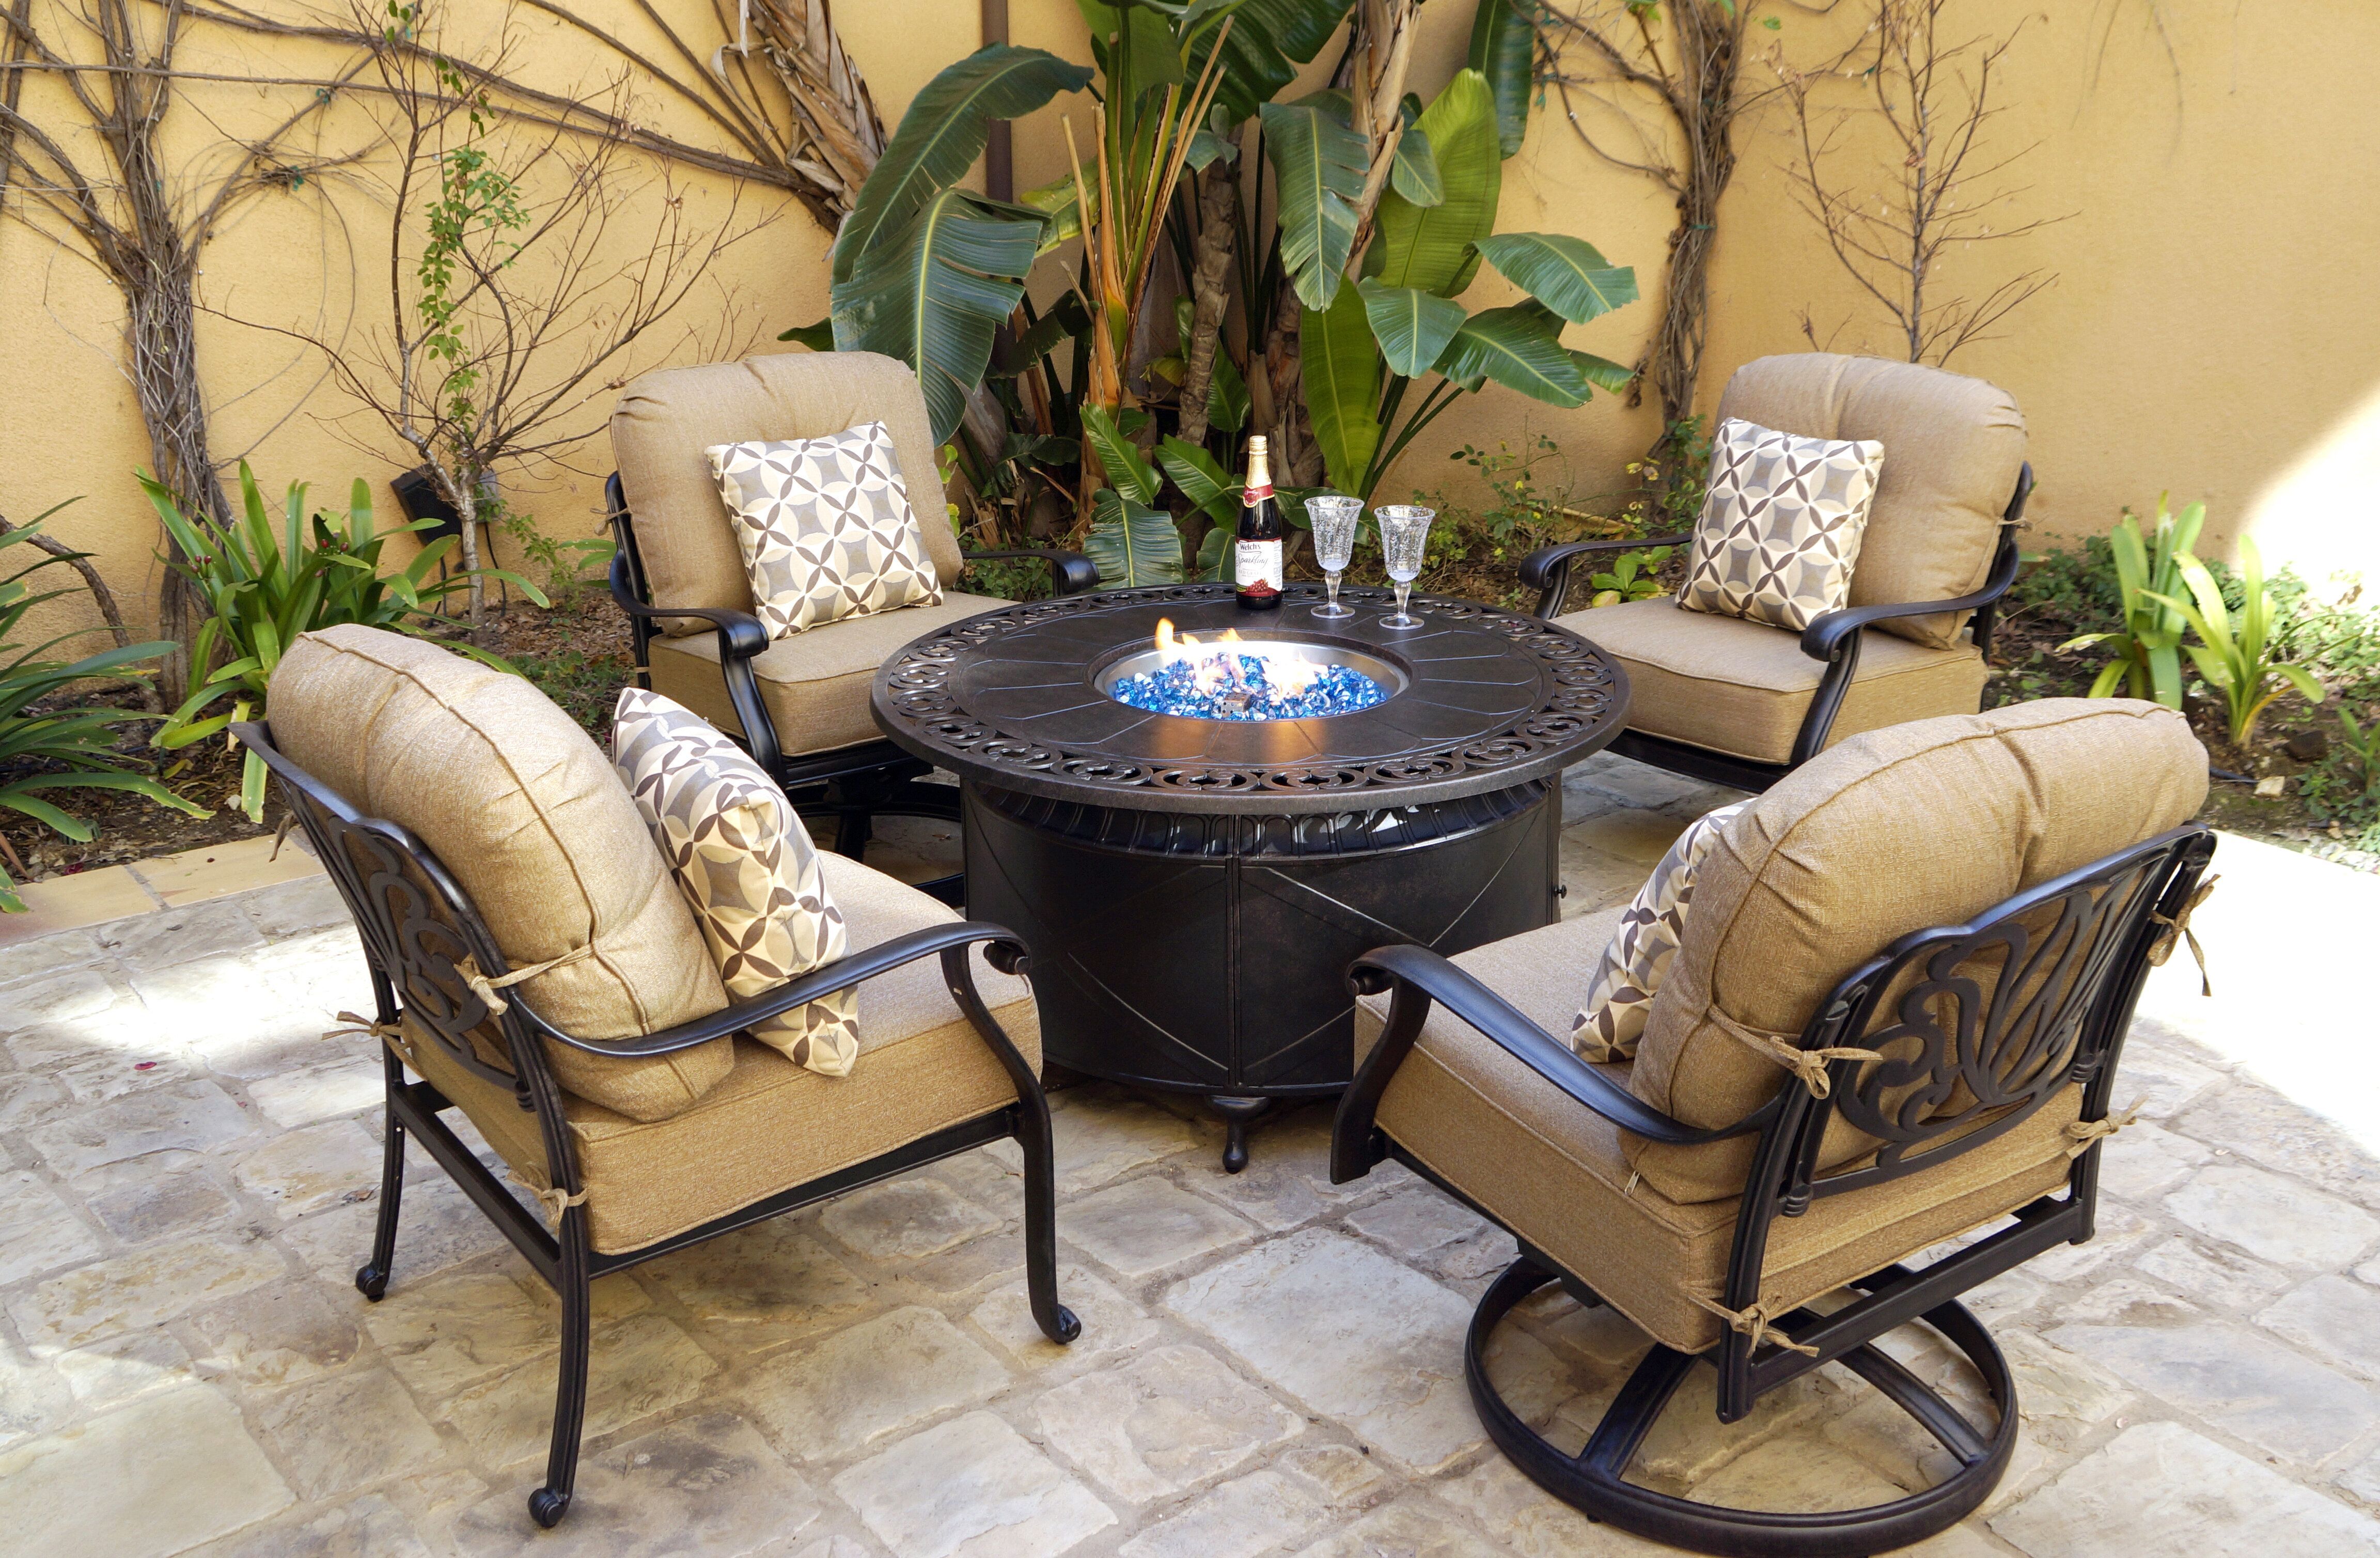 Lark Manor Annoeska 5 Piece Patio Propane Fire Pit Conversation Set With  Cushions, 47'' Round Fire Pit Chat Table & Reviews | Wayfair With Regard To 5 Piece Patio Conversation Set (View 15 of 15)